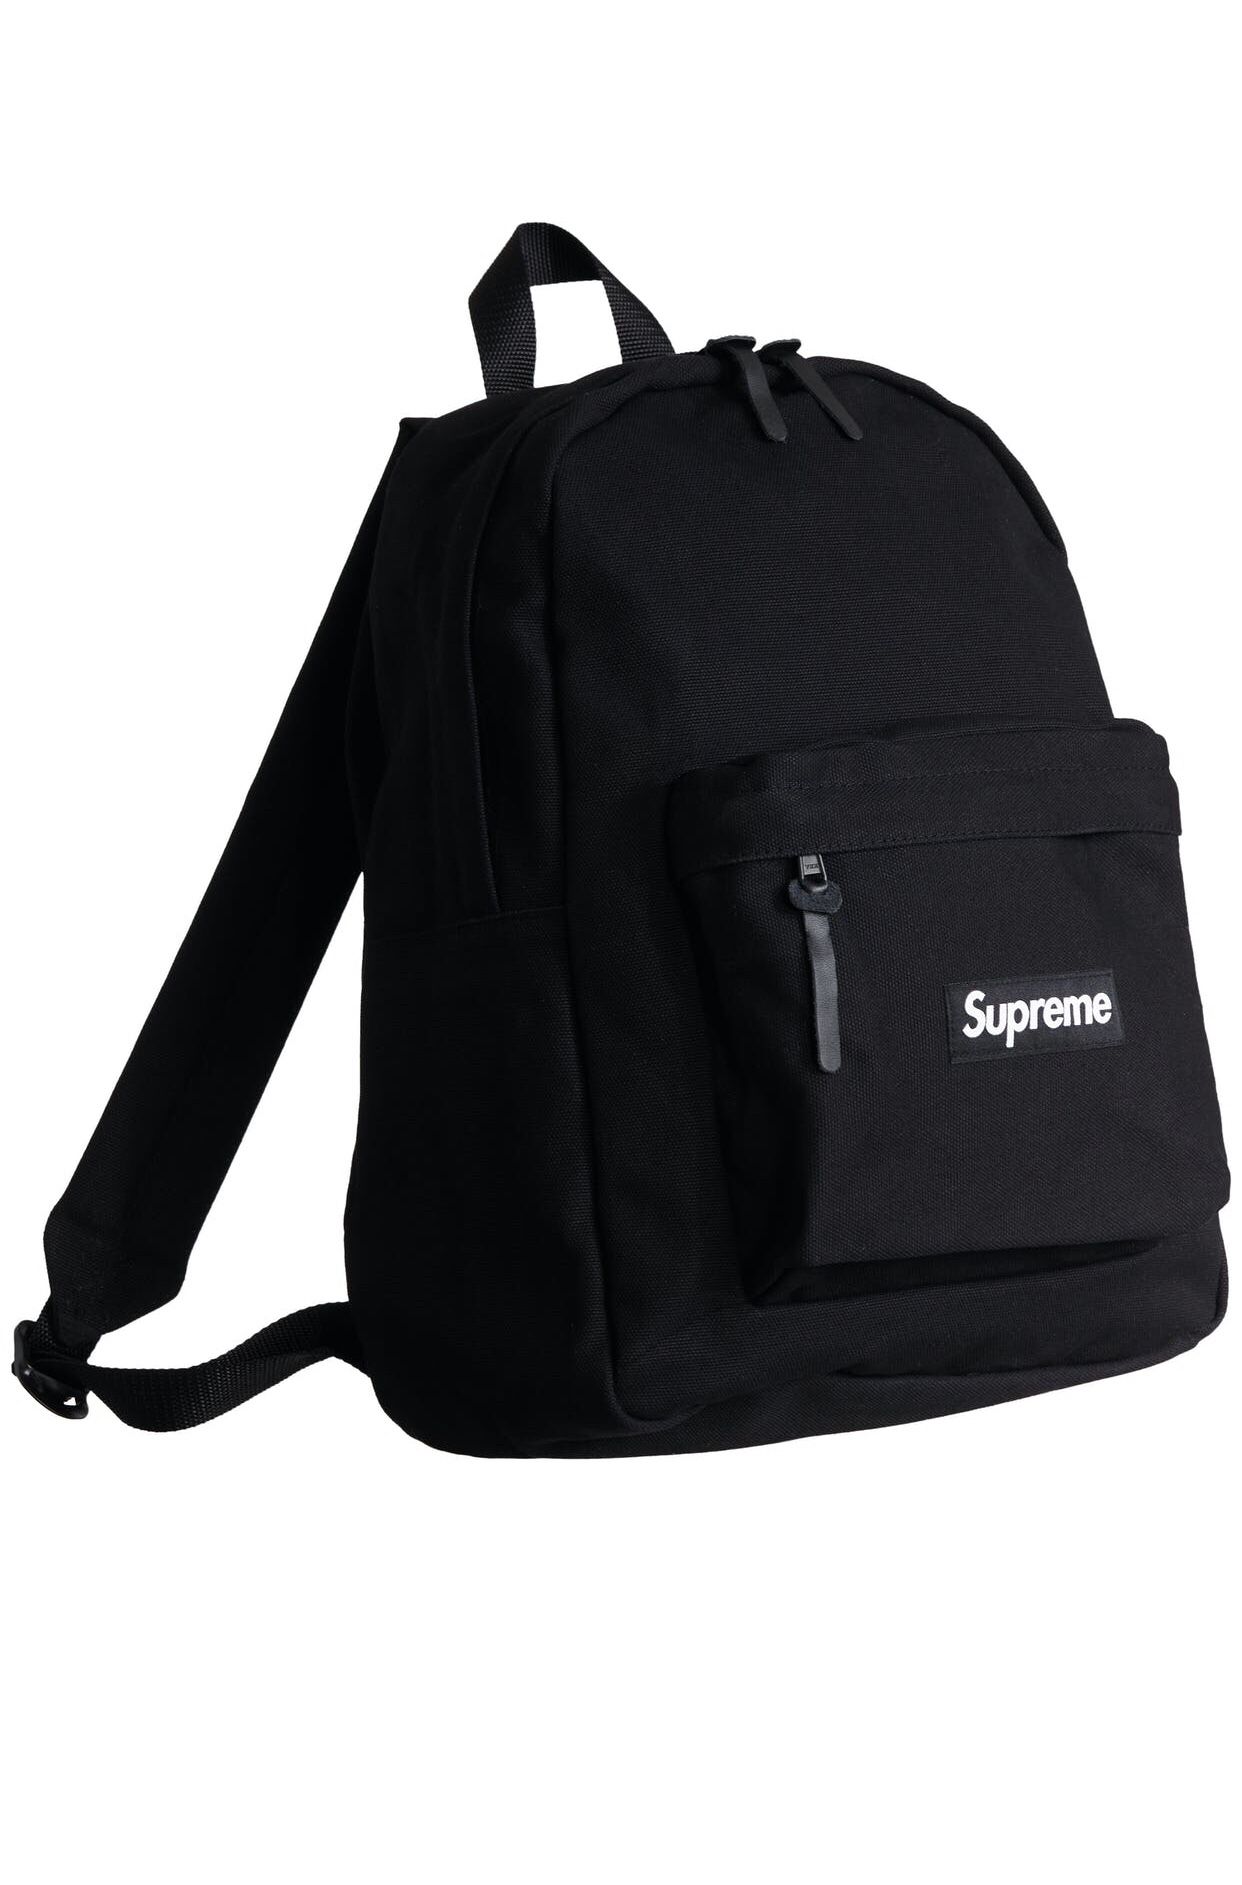 Supreme Canvas backpack white and black